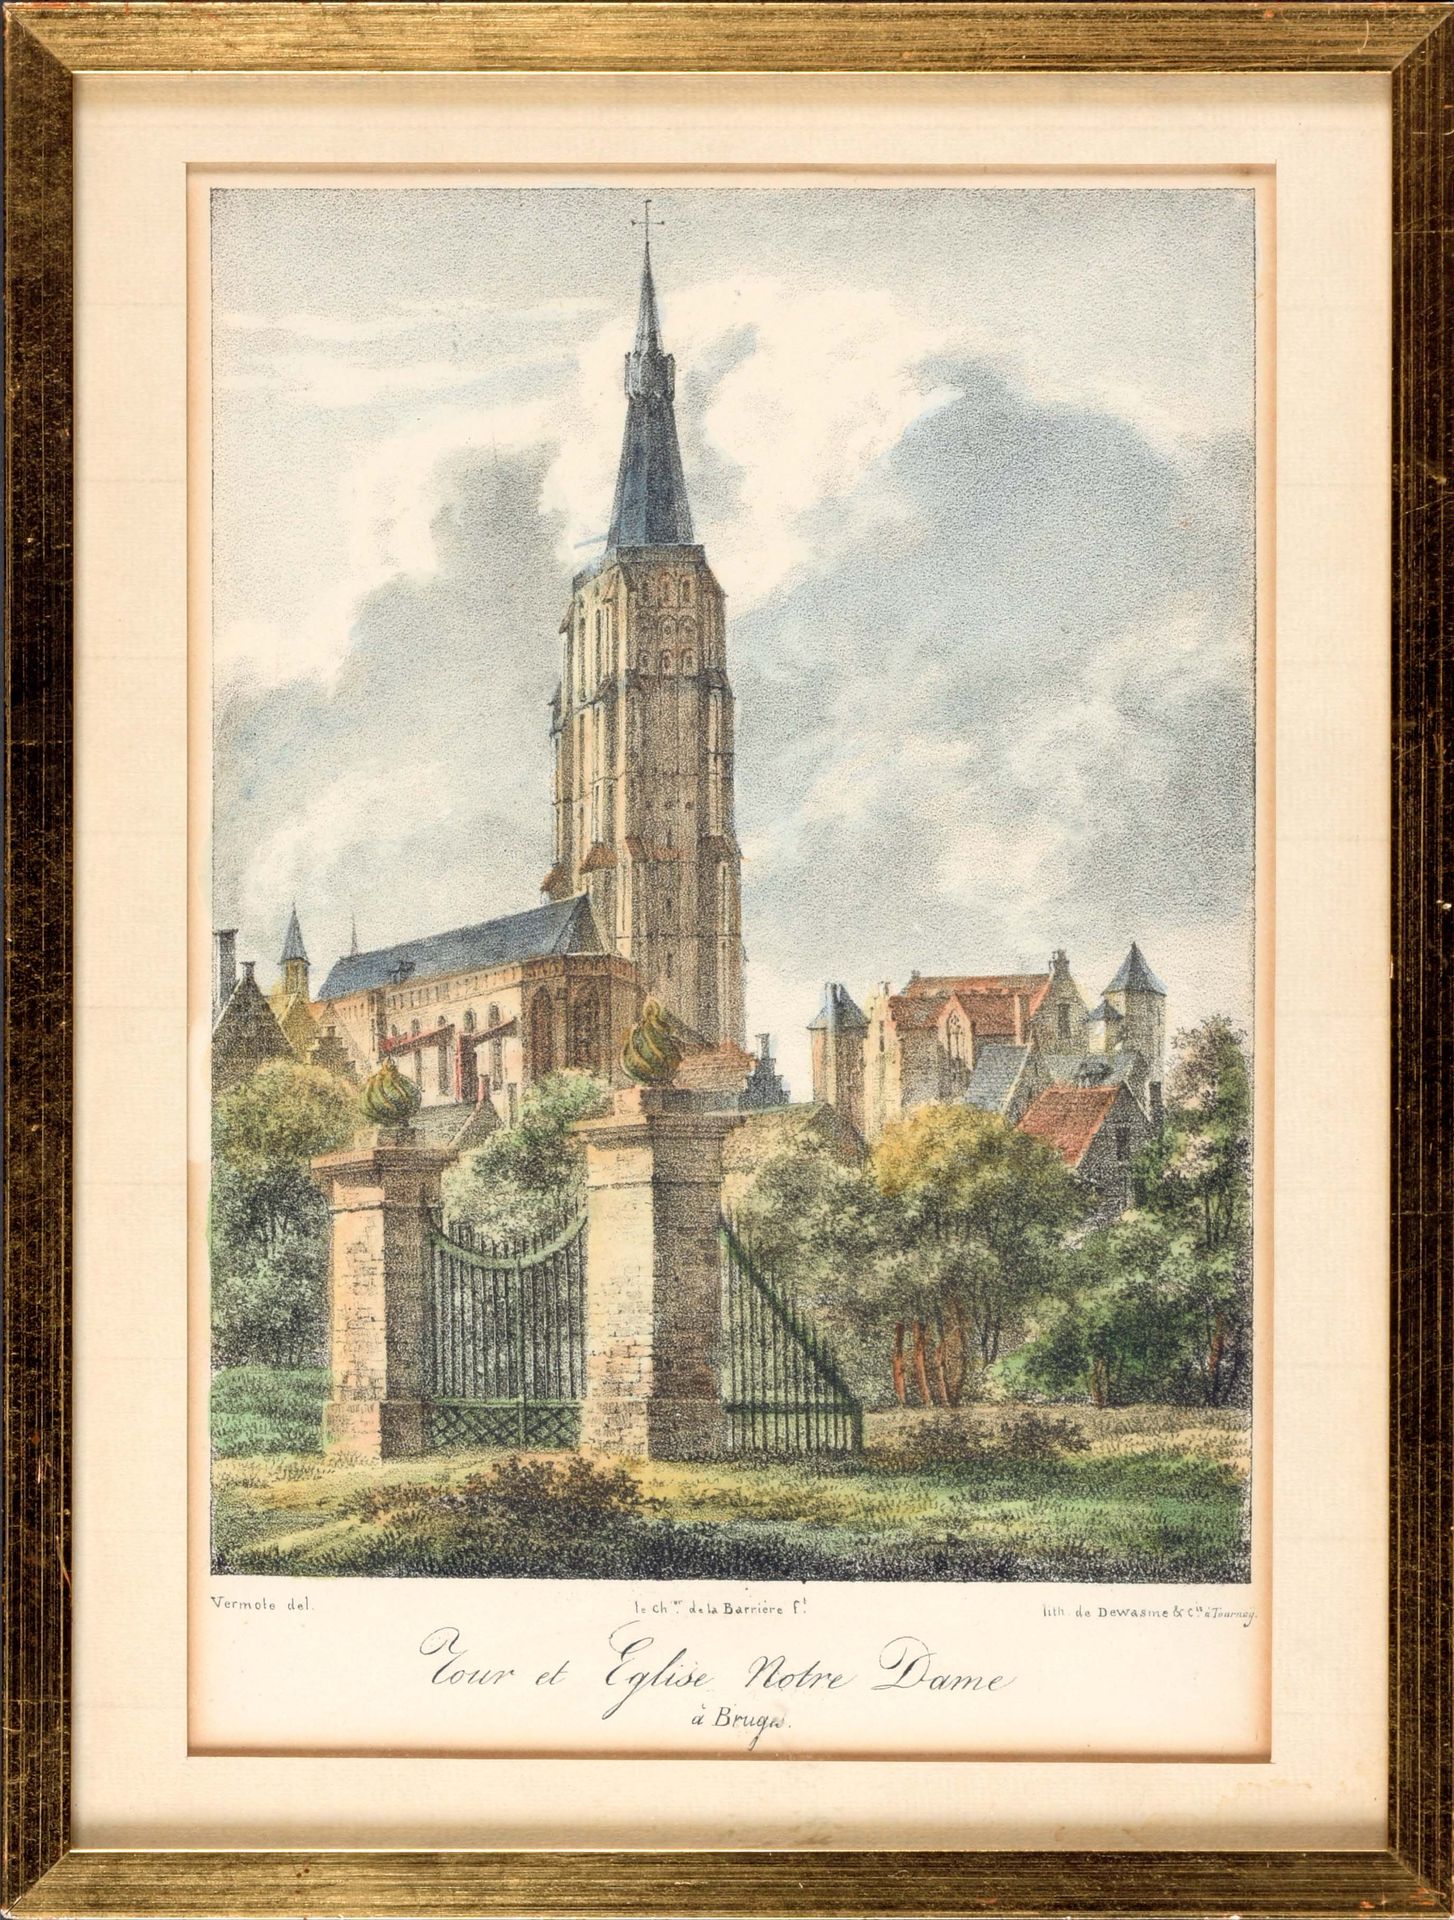 [Brugge] Tower and Church of Our Lady in Bruges

Litho (23 x 16 cm), handgekleur&hellip;